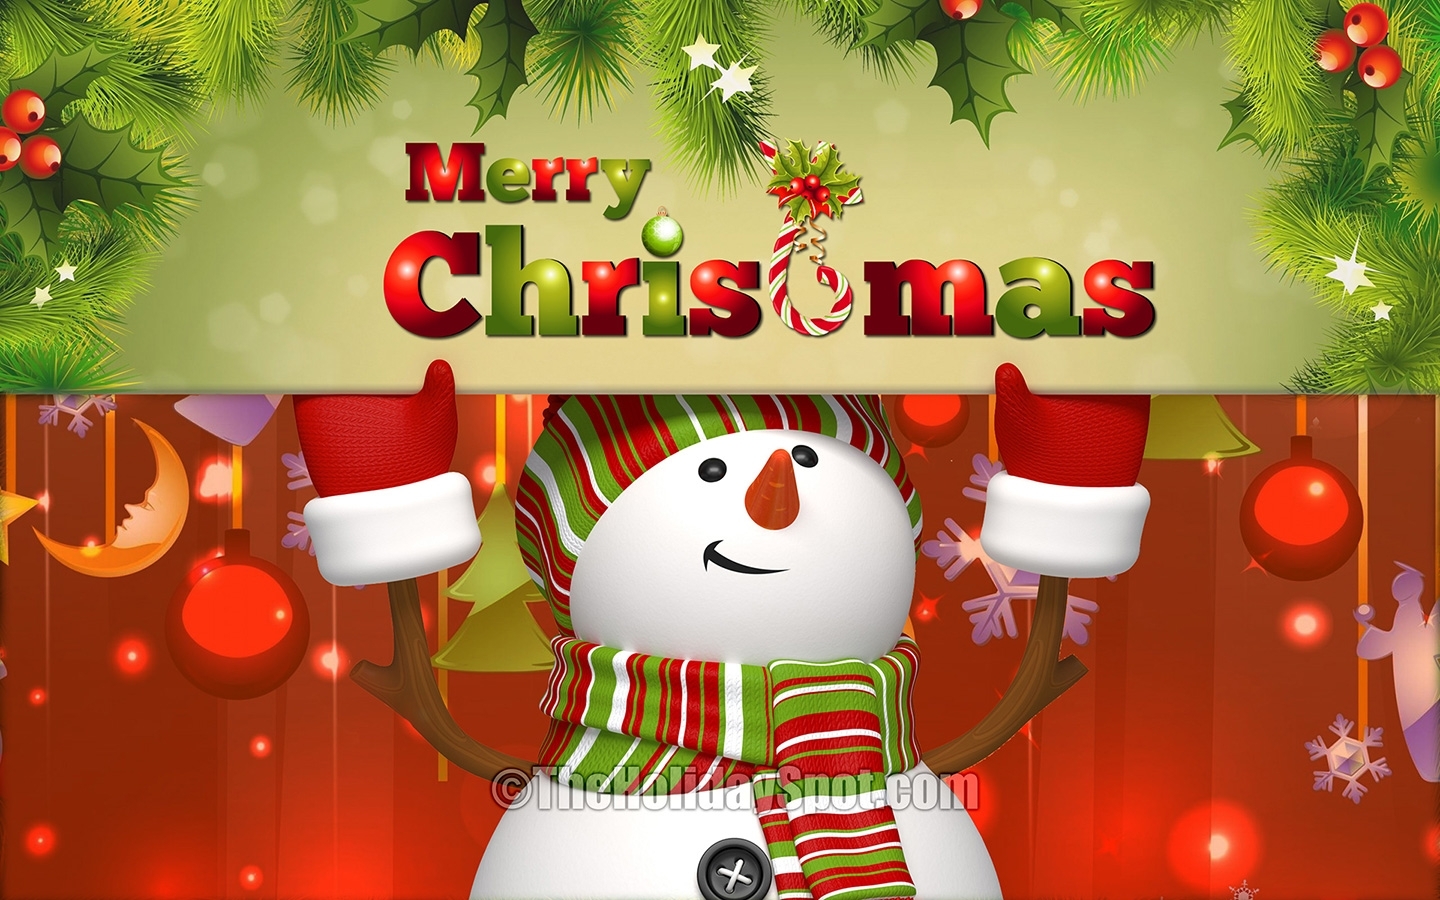 10 Top Merry Christmas Wall Paper FULL HD 1920×1080 For PC Desktop